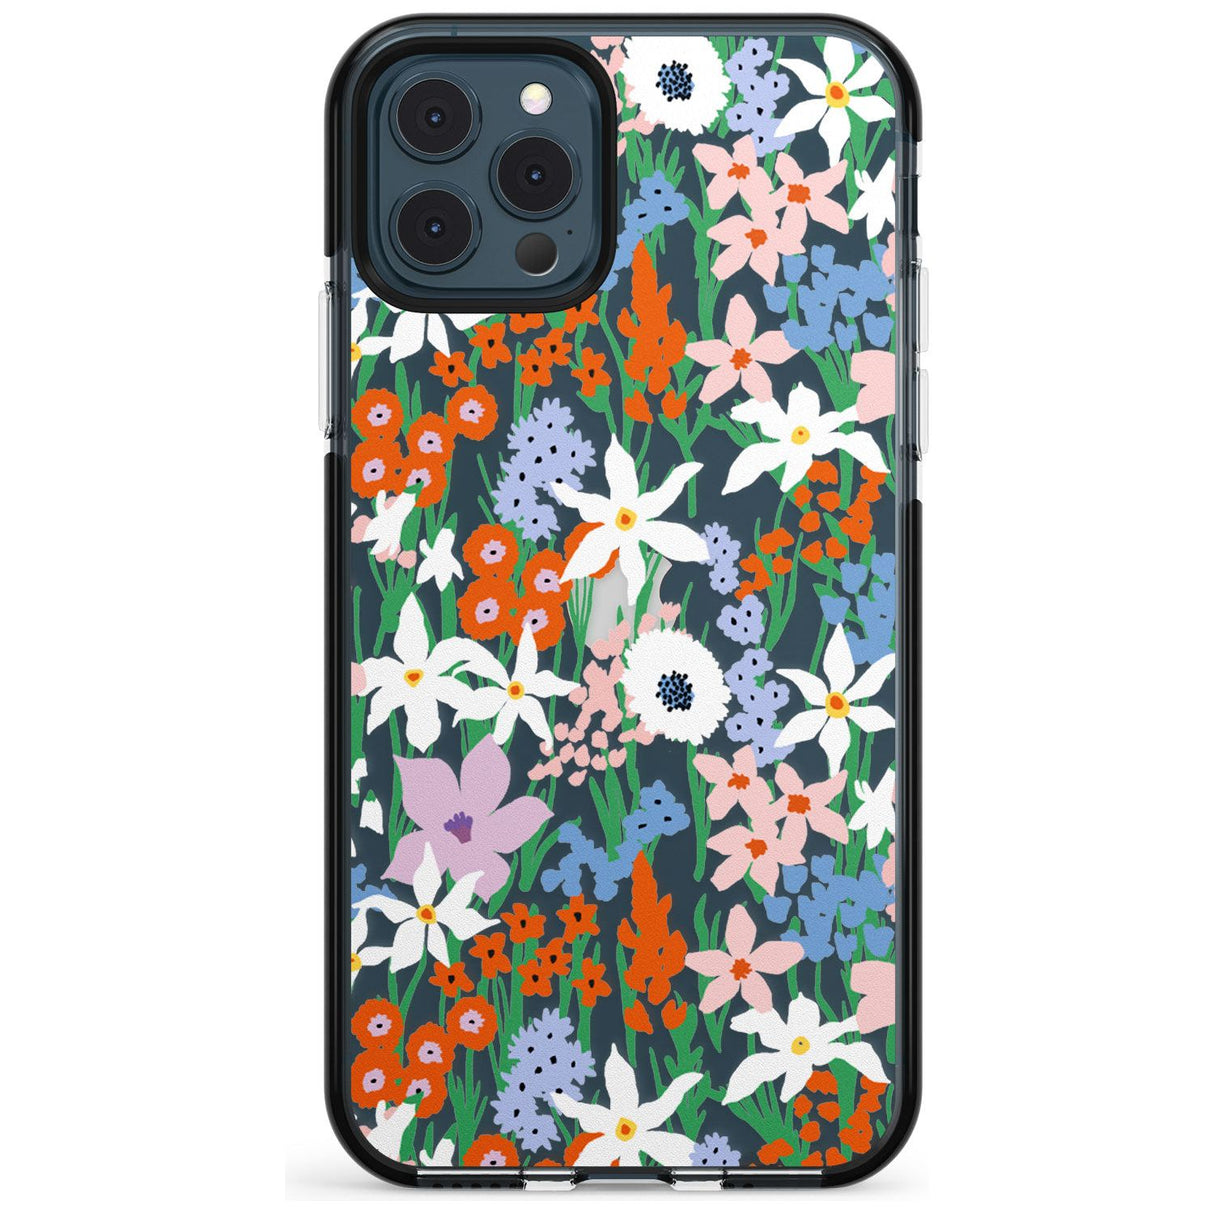 Springtime Meadow: Transparent Pink Fade Impact Phone Case for iPhone 11